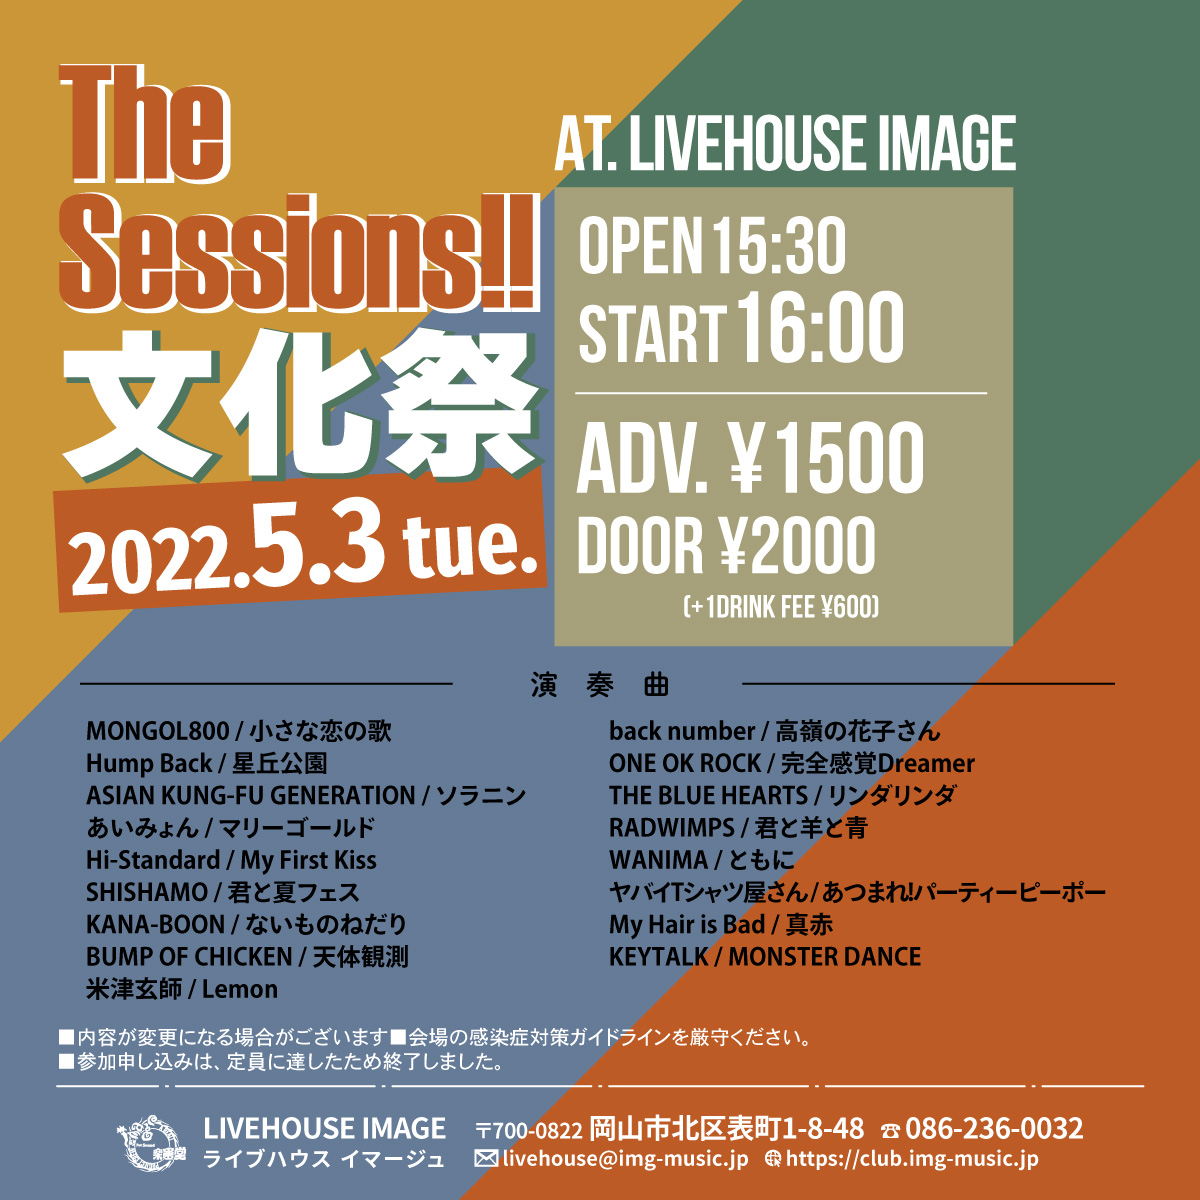 TheSessions!! 文化祭